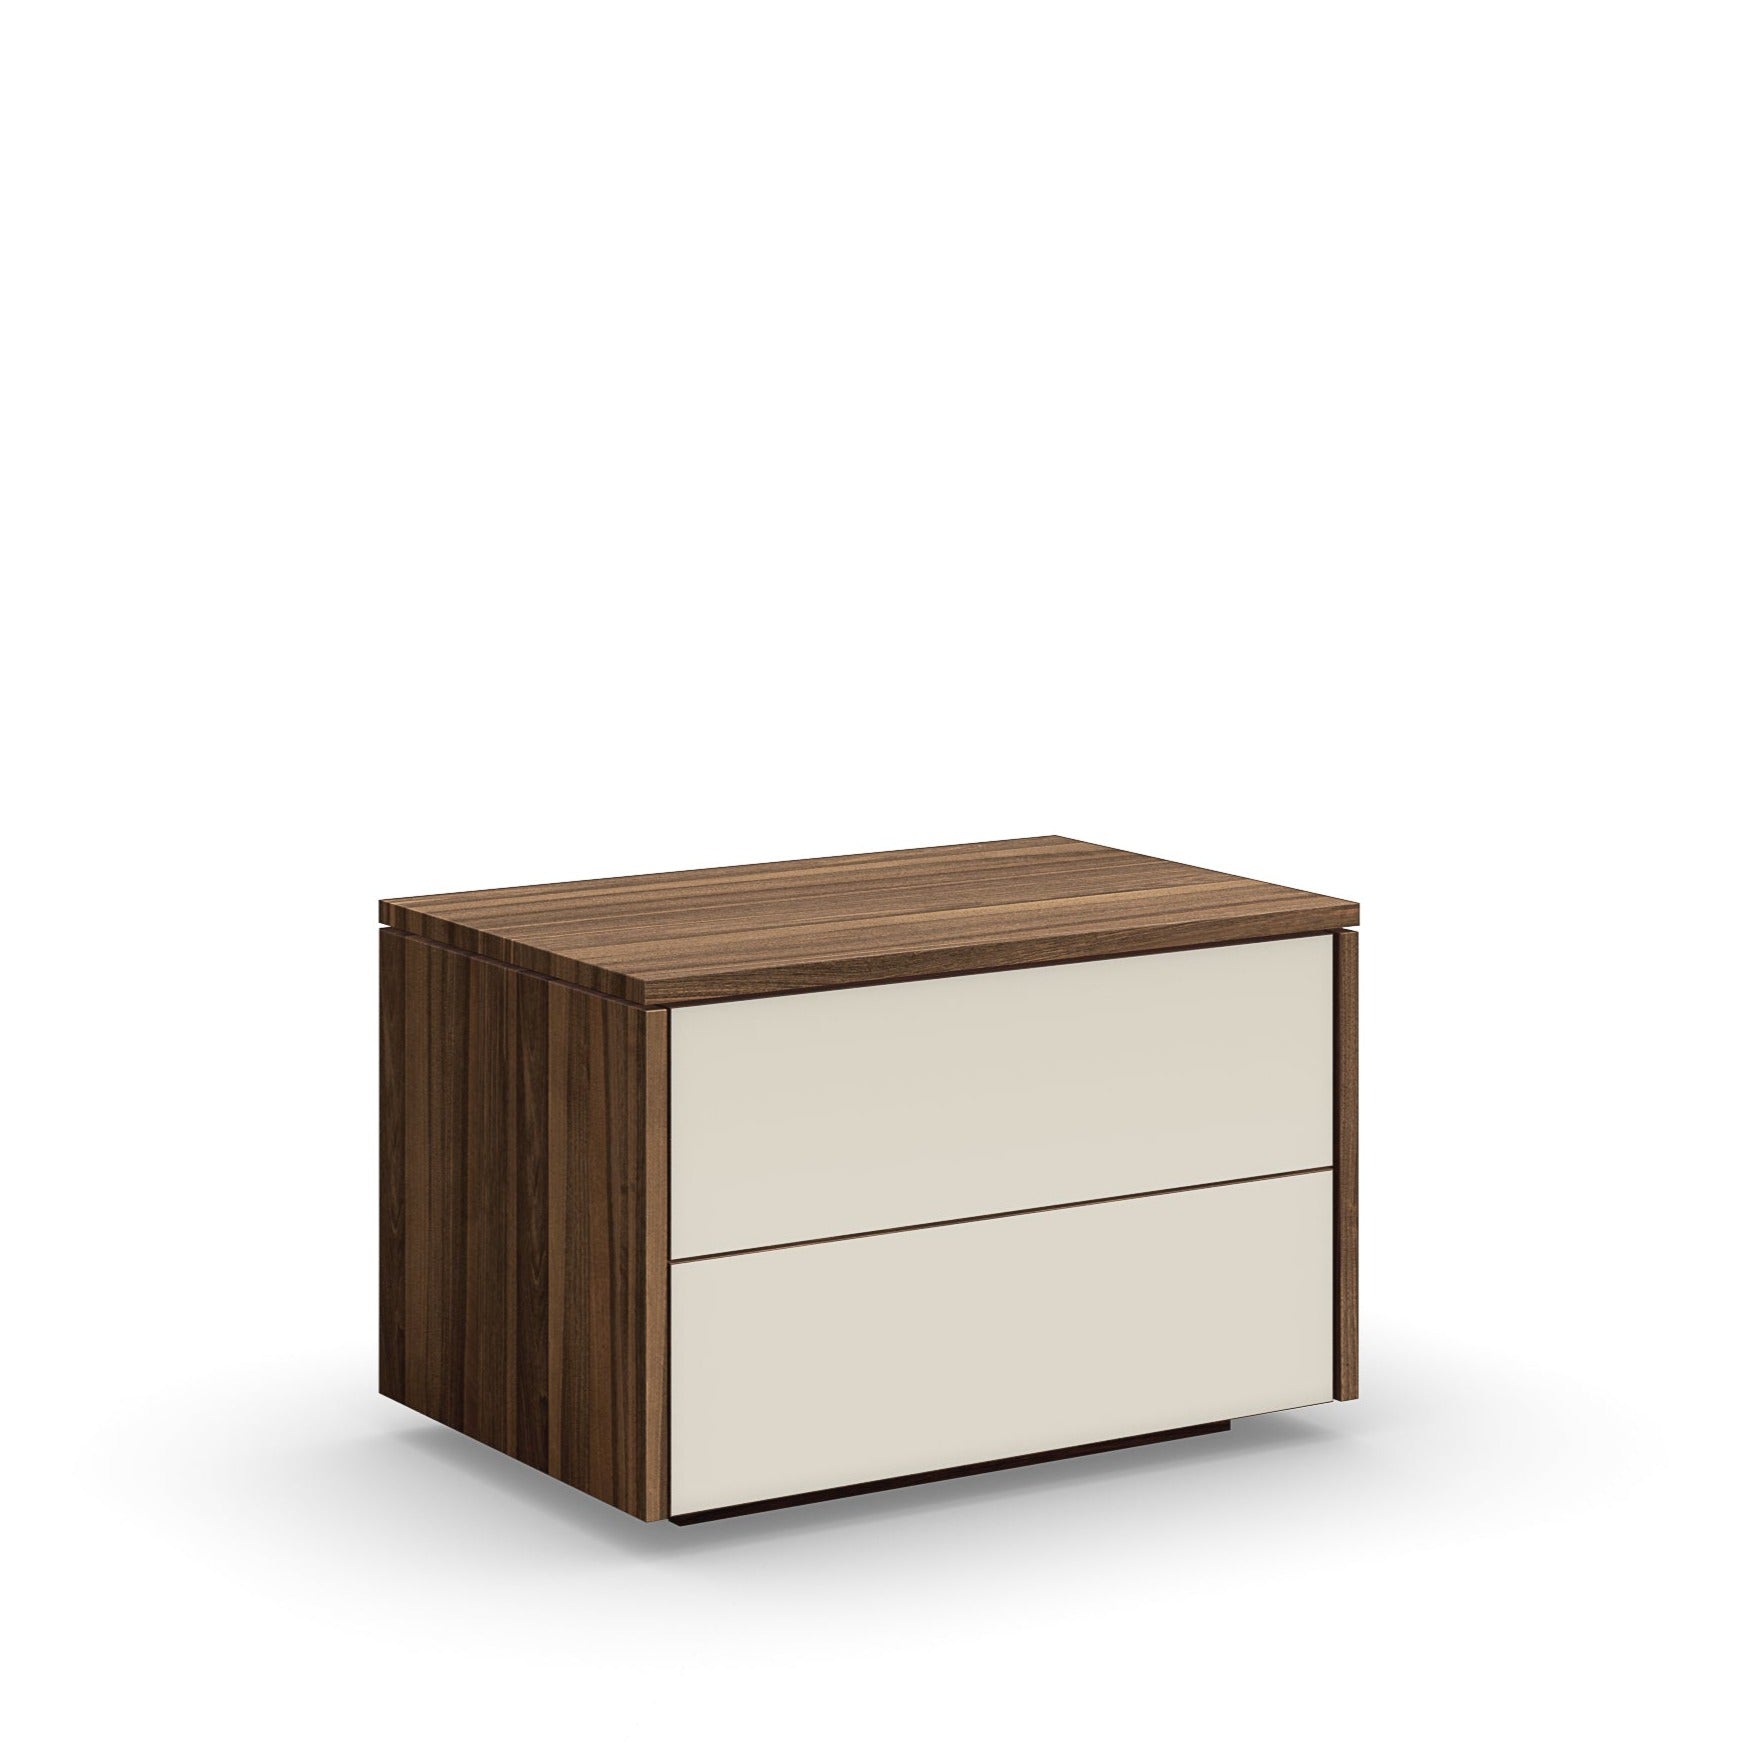 MYA NIGHT TABLE, 2 DRAWERS WITH GLASS DRAWER FRONTS